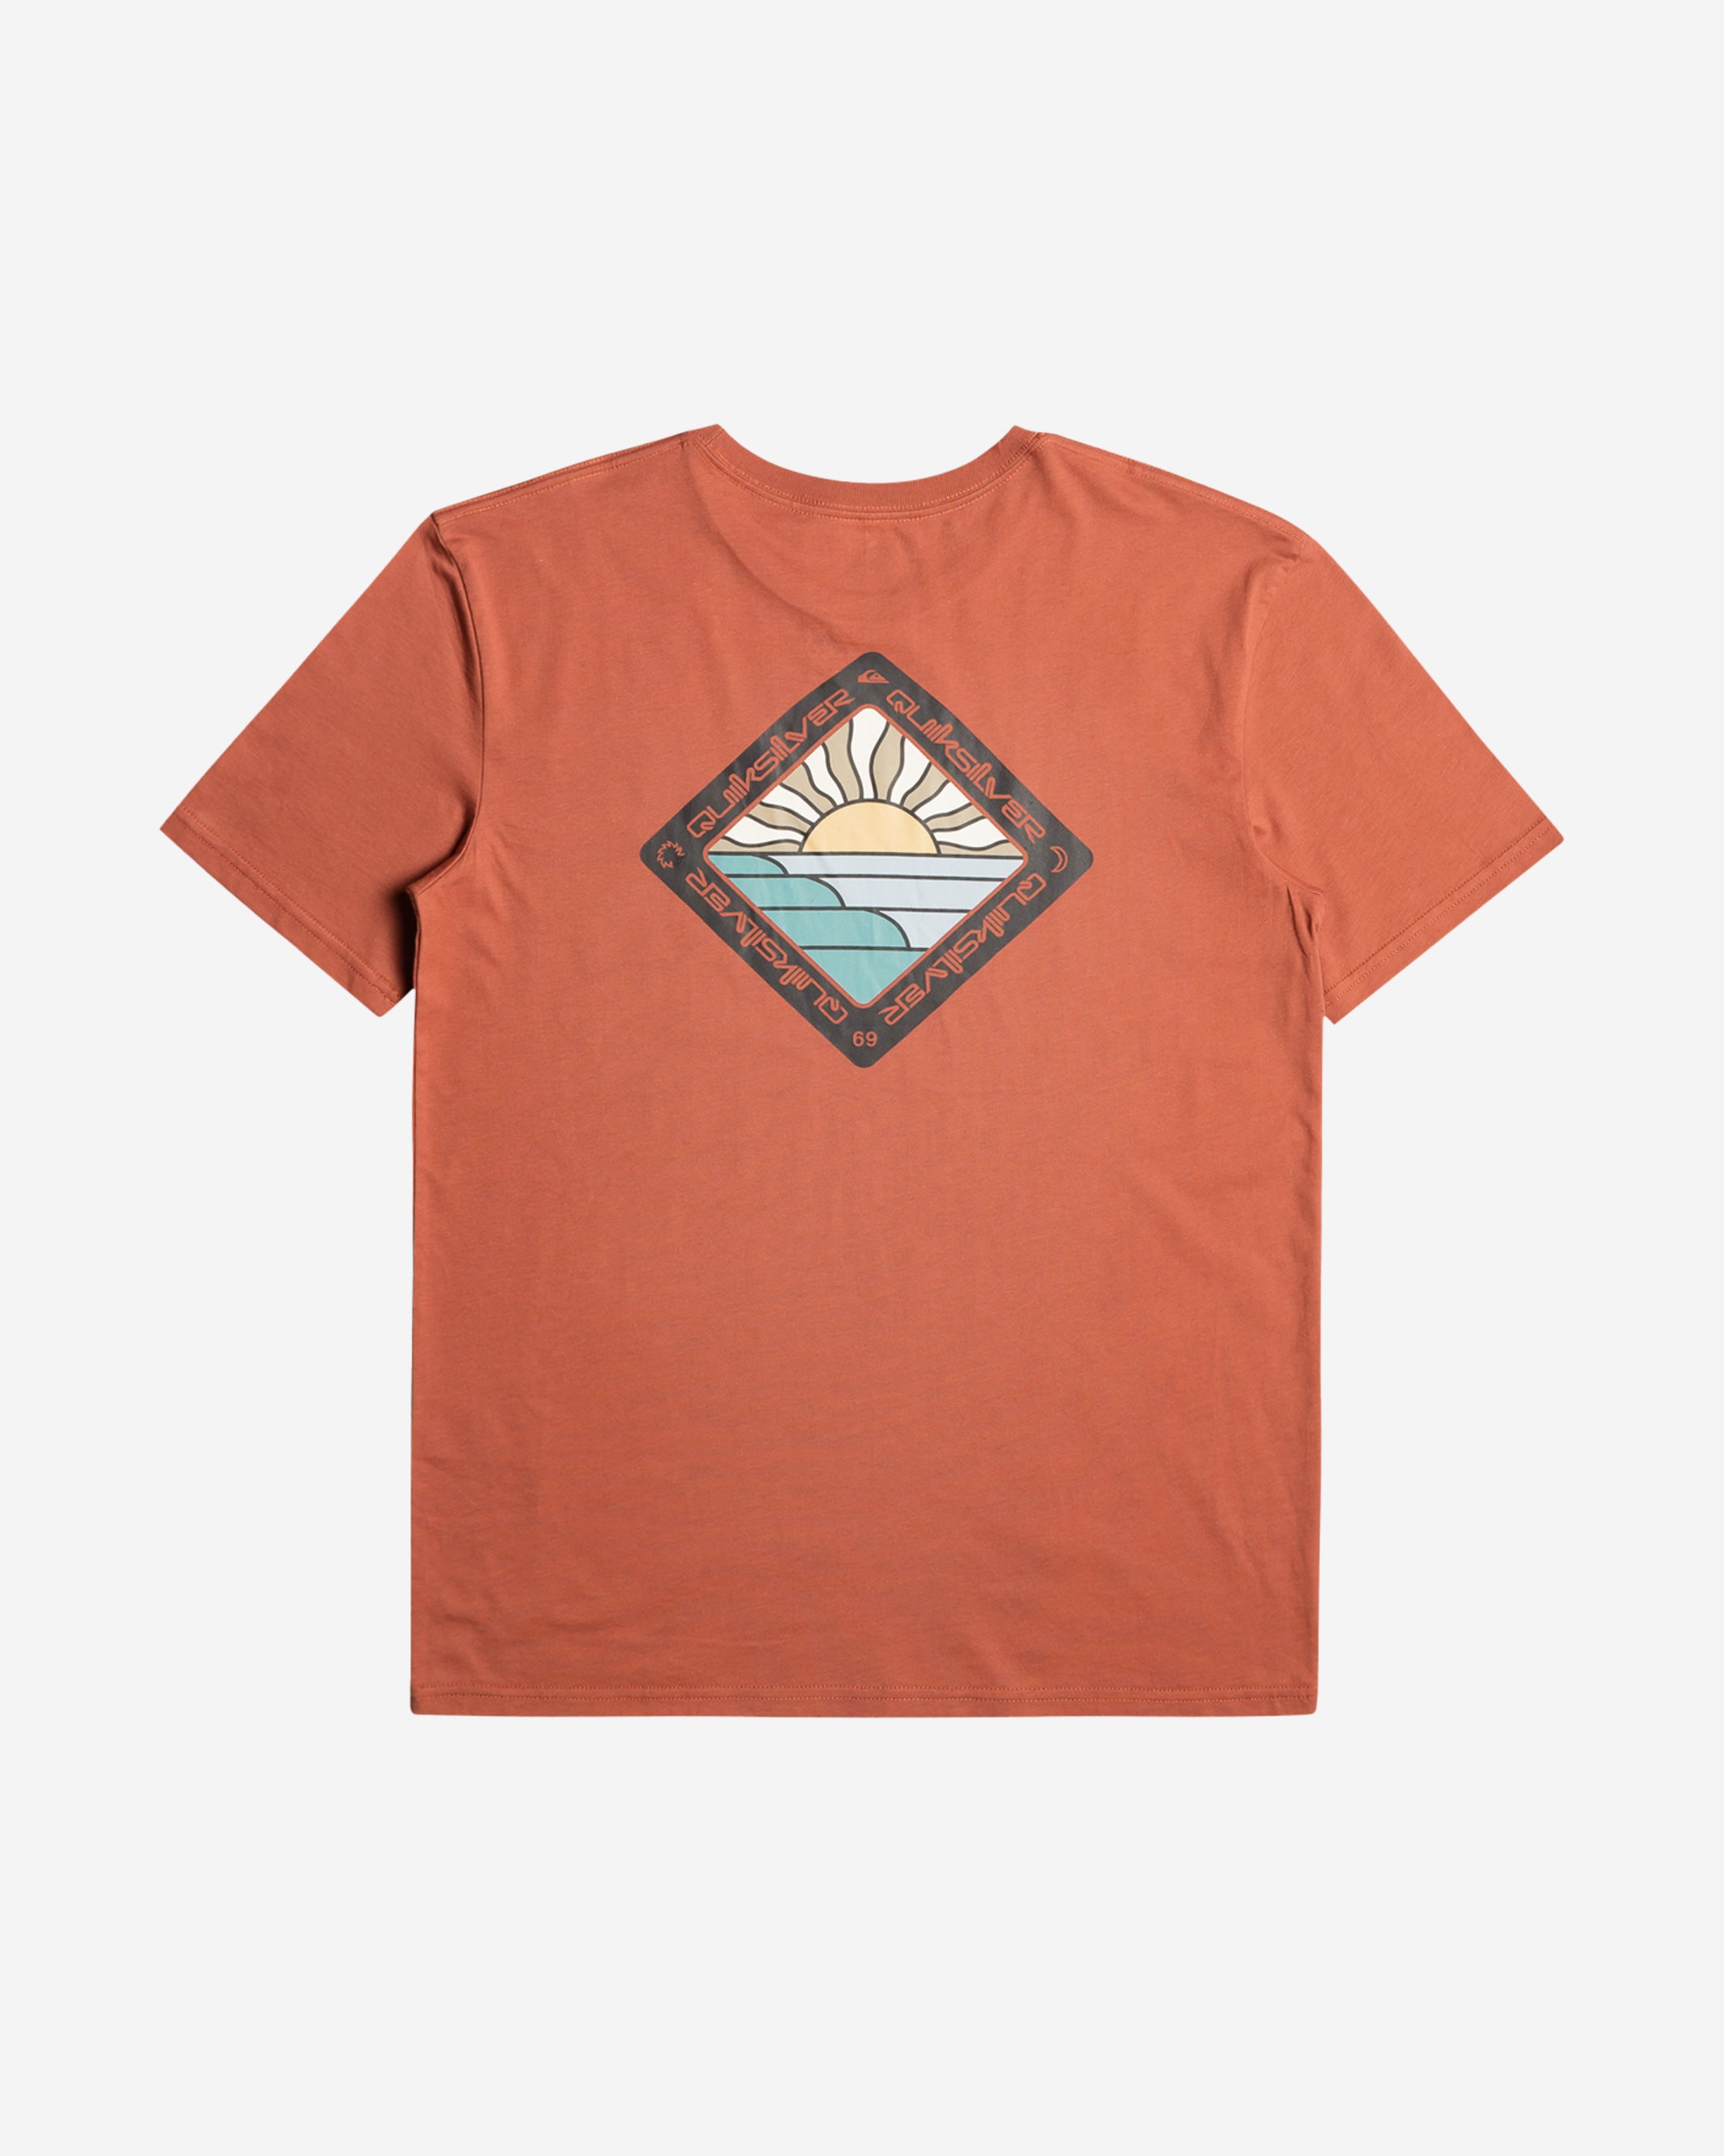 The sun, sea, and Quiksilver. The Scenic Journey t-shirt gives you everything you're into, along with the soft comfort of combed cotton.